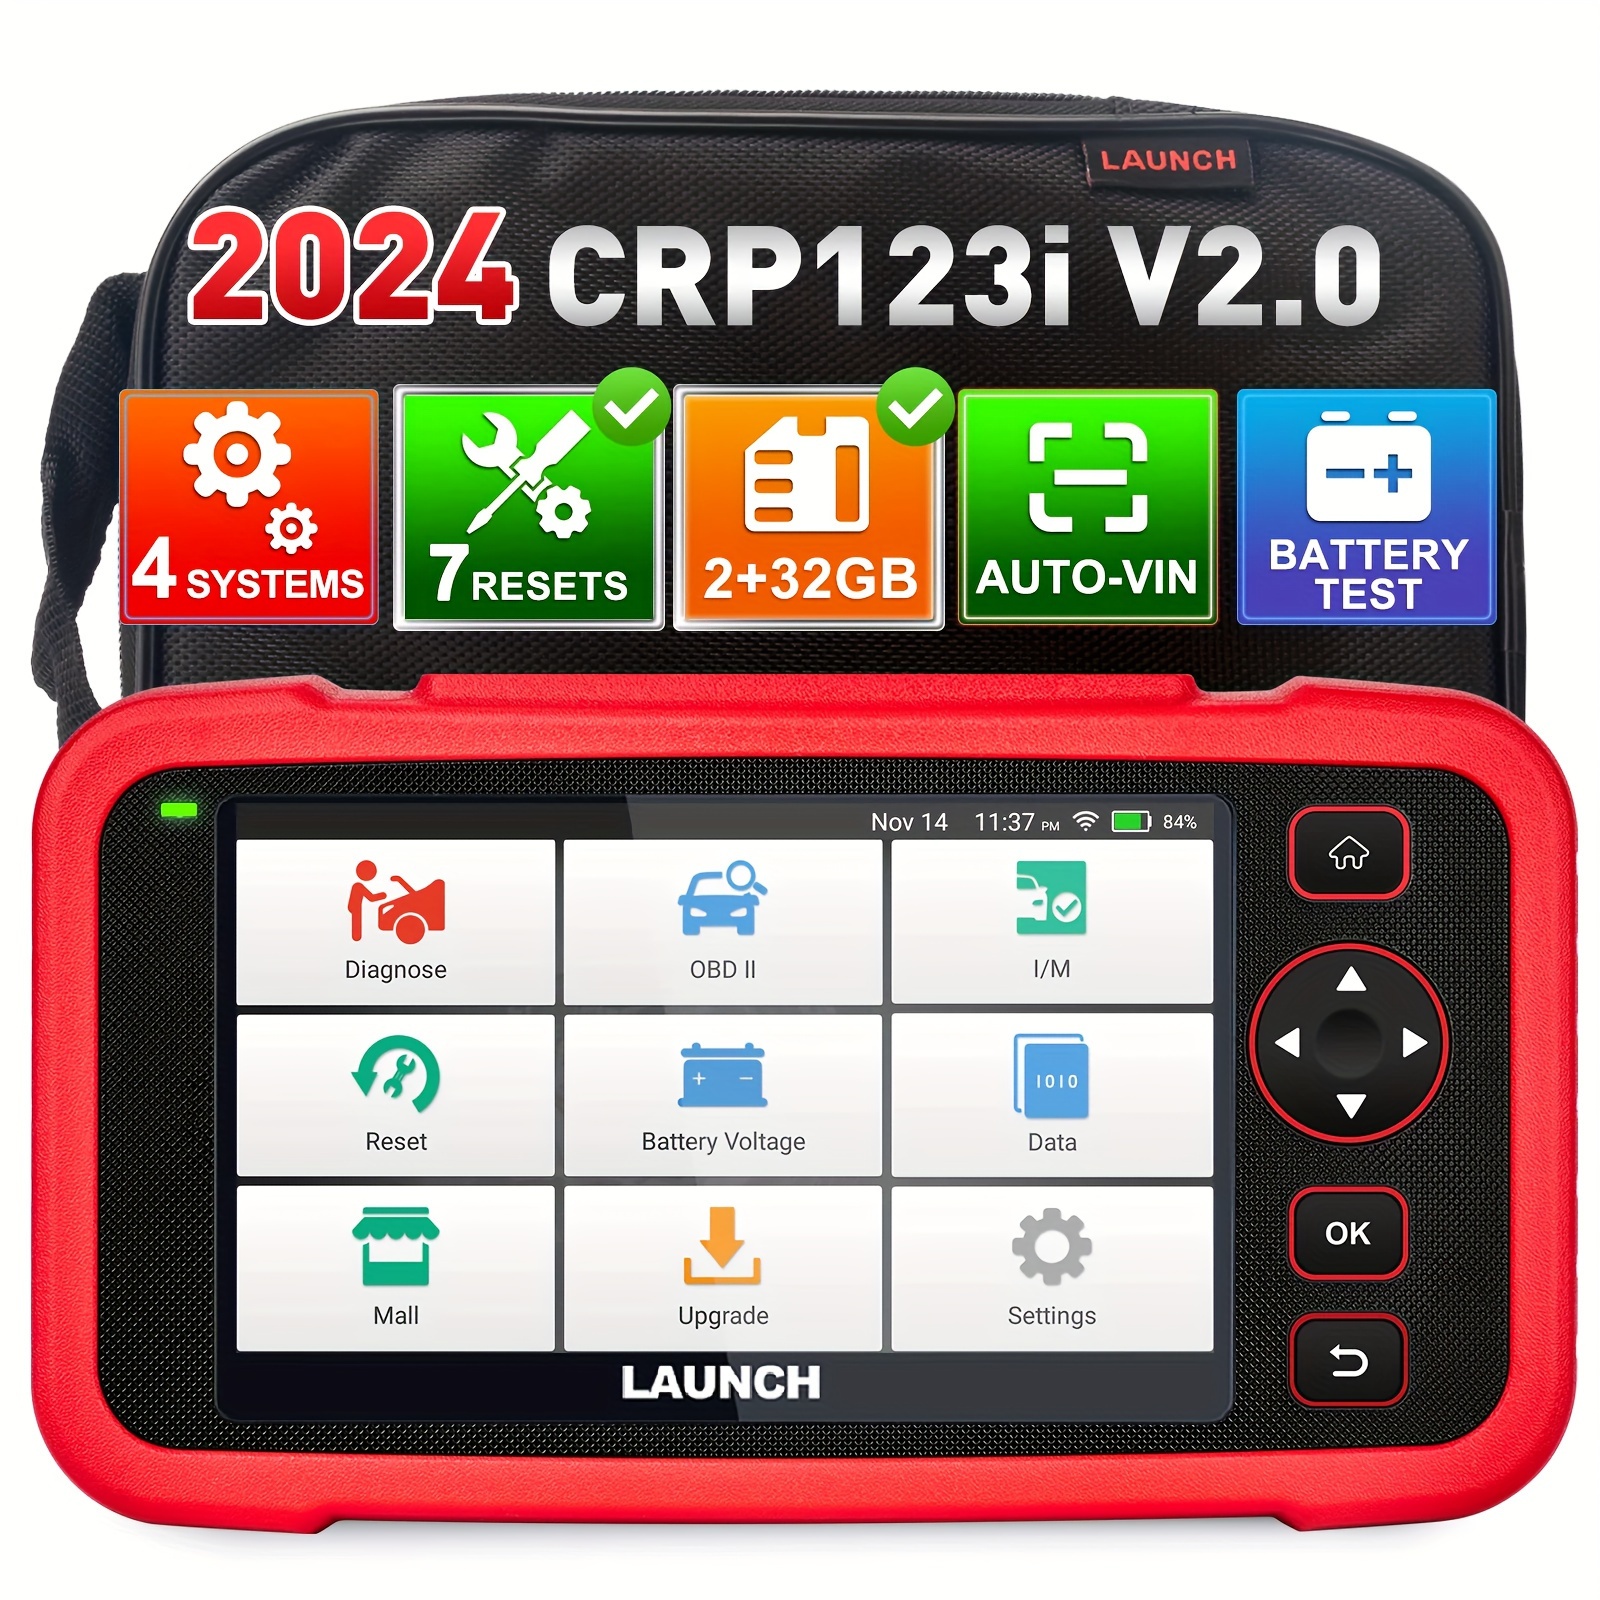 

Launch Crp123i V2.0 Obd2 Scanner, 2024 New 4 Systems Diagnostic Scanner With 7 Resets, Abs Bleeding, Sas, Throttle, Oil, D.p.f, Epb Reset, Bat Match, Autovin, Fca Autoauth, 5 Years Backup